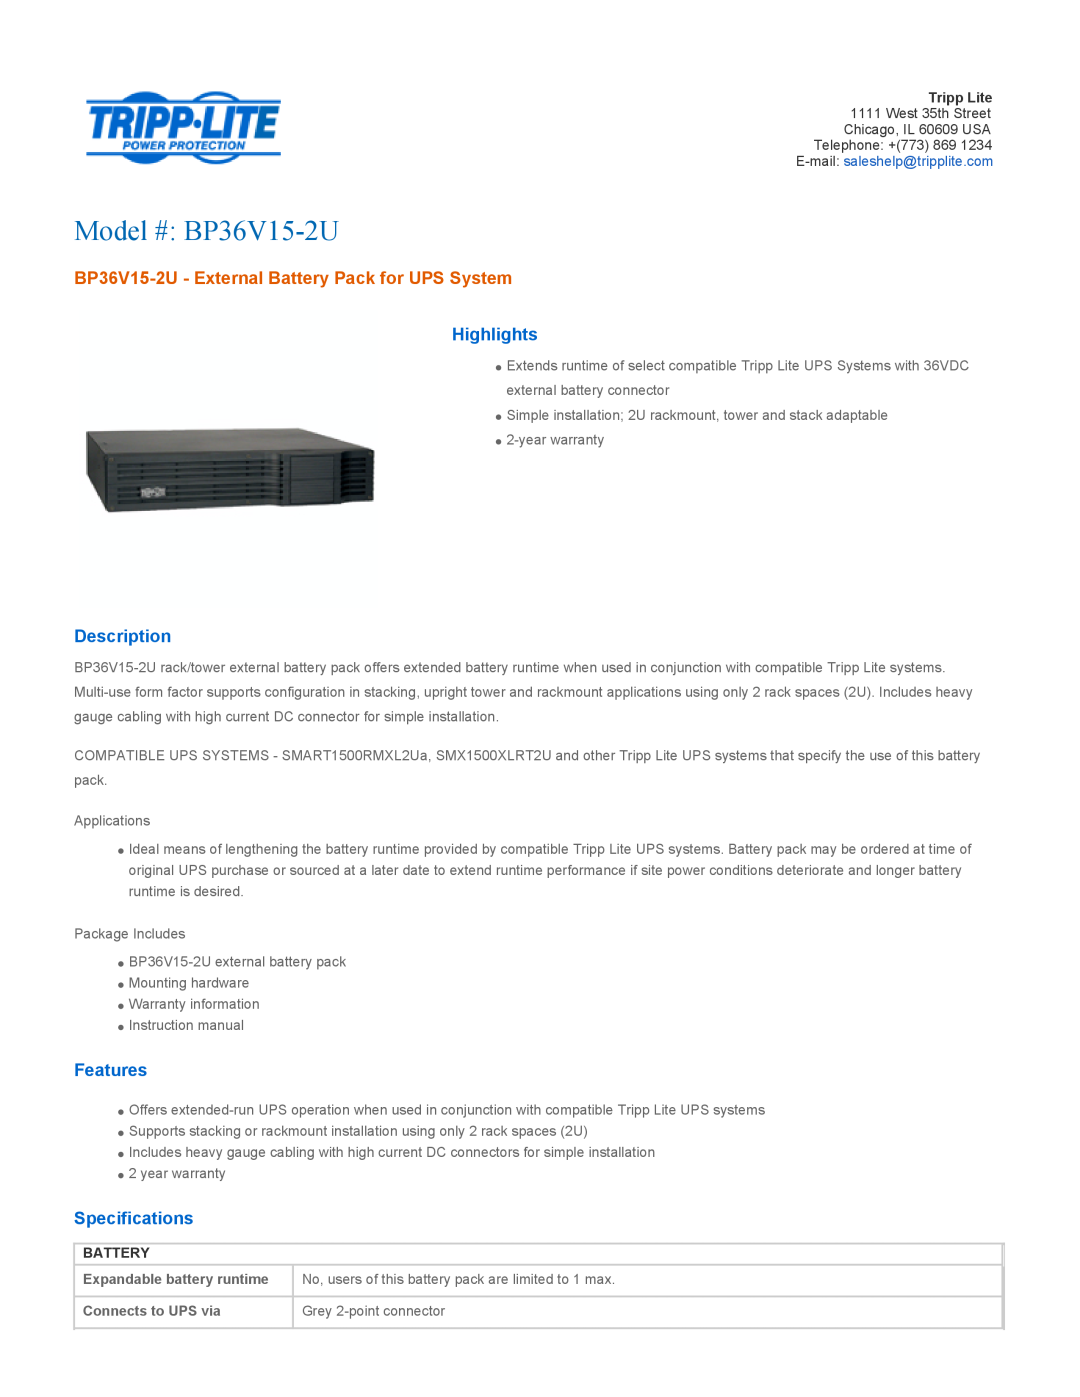 Tripp Lite BP36V15-2U specifications Highlights, Description, Features, Specifications, Battery, Connects to UPS via 